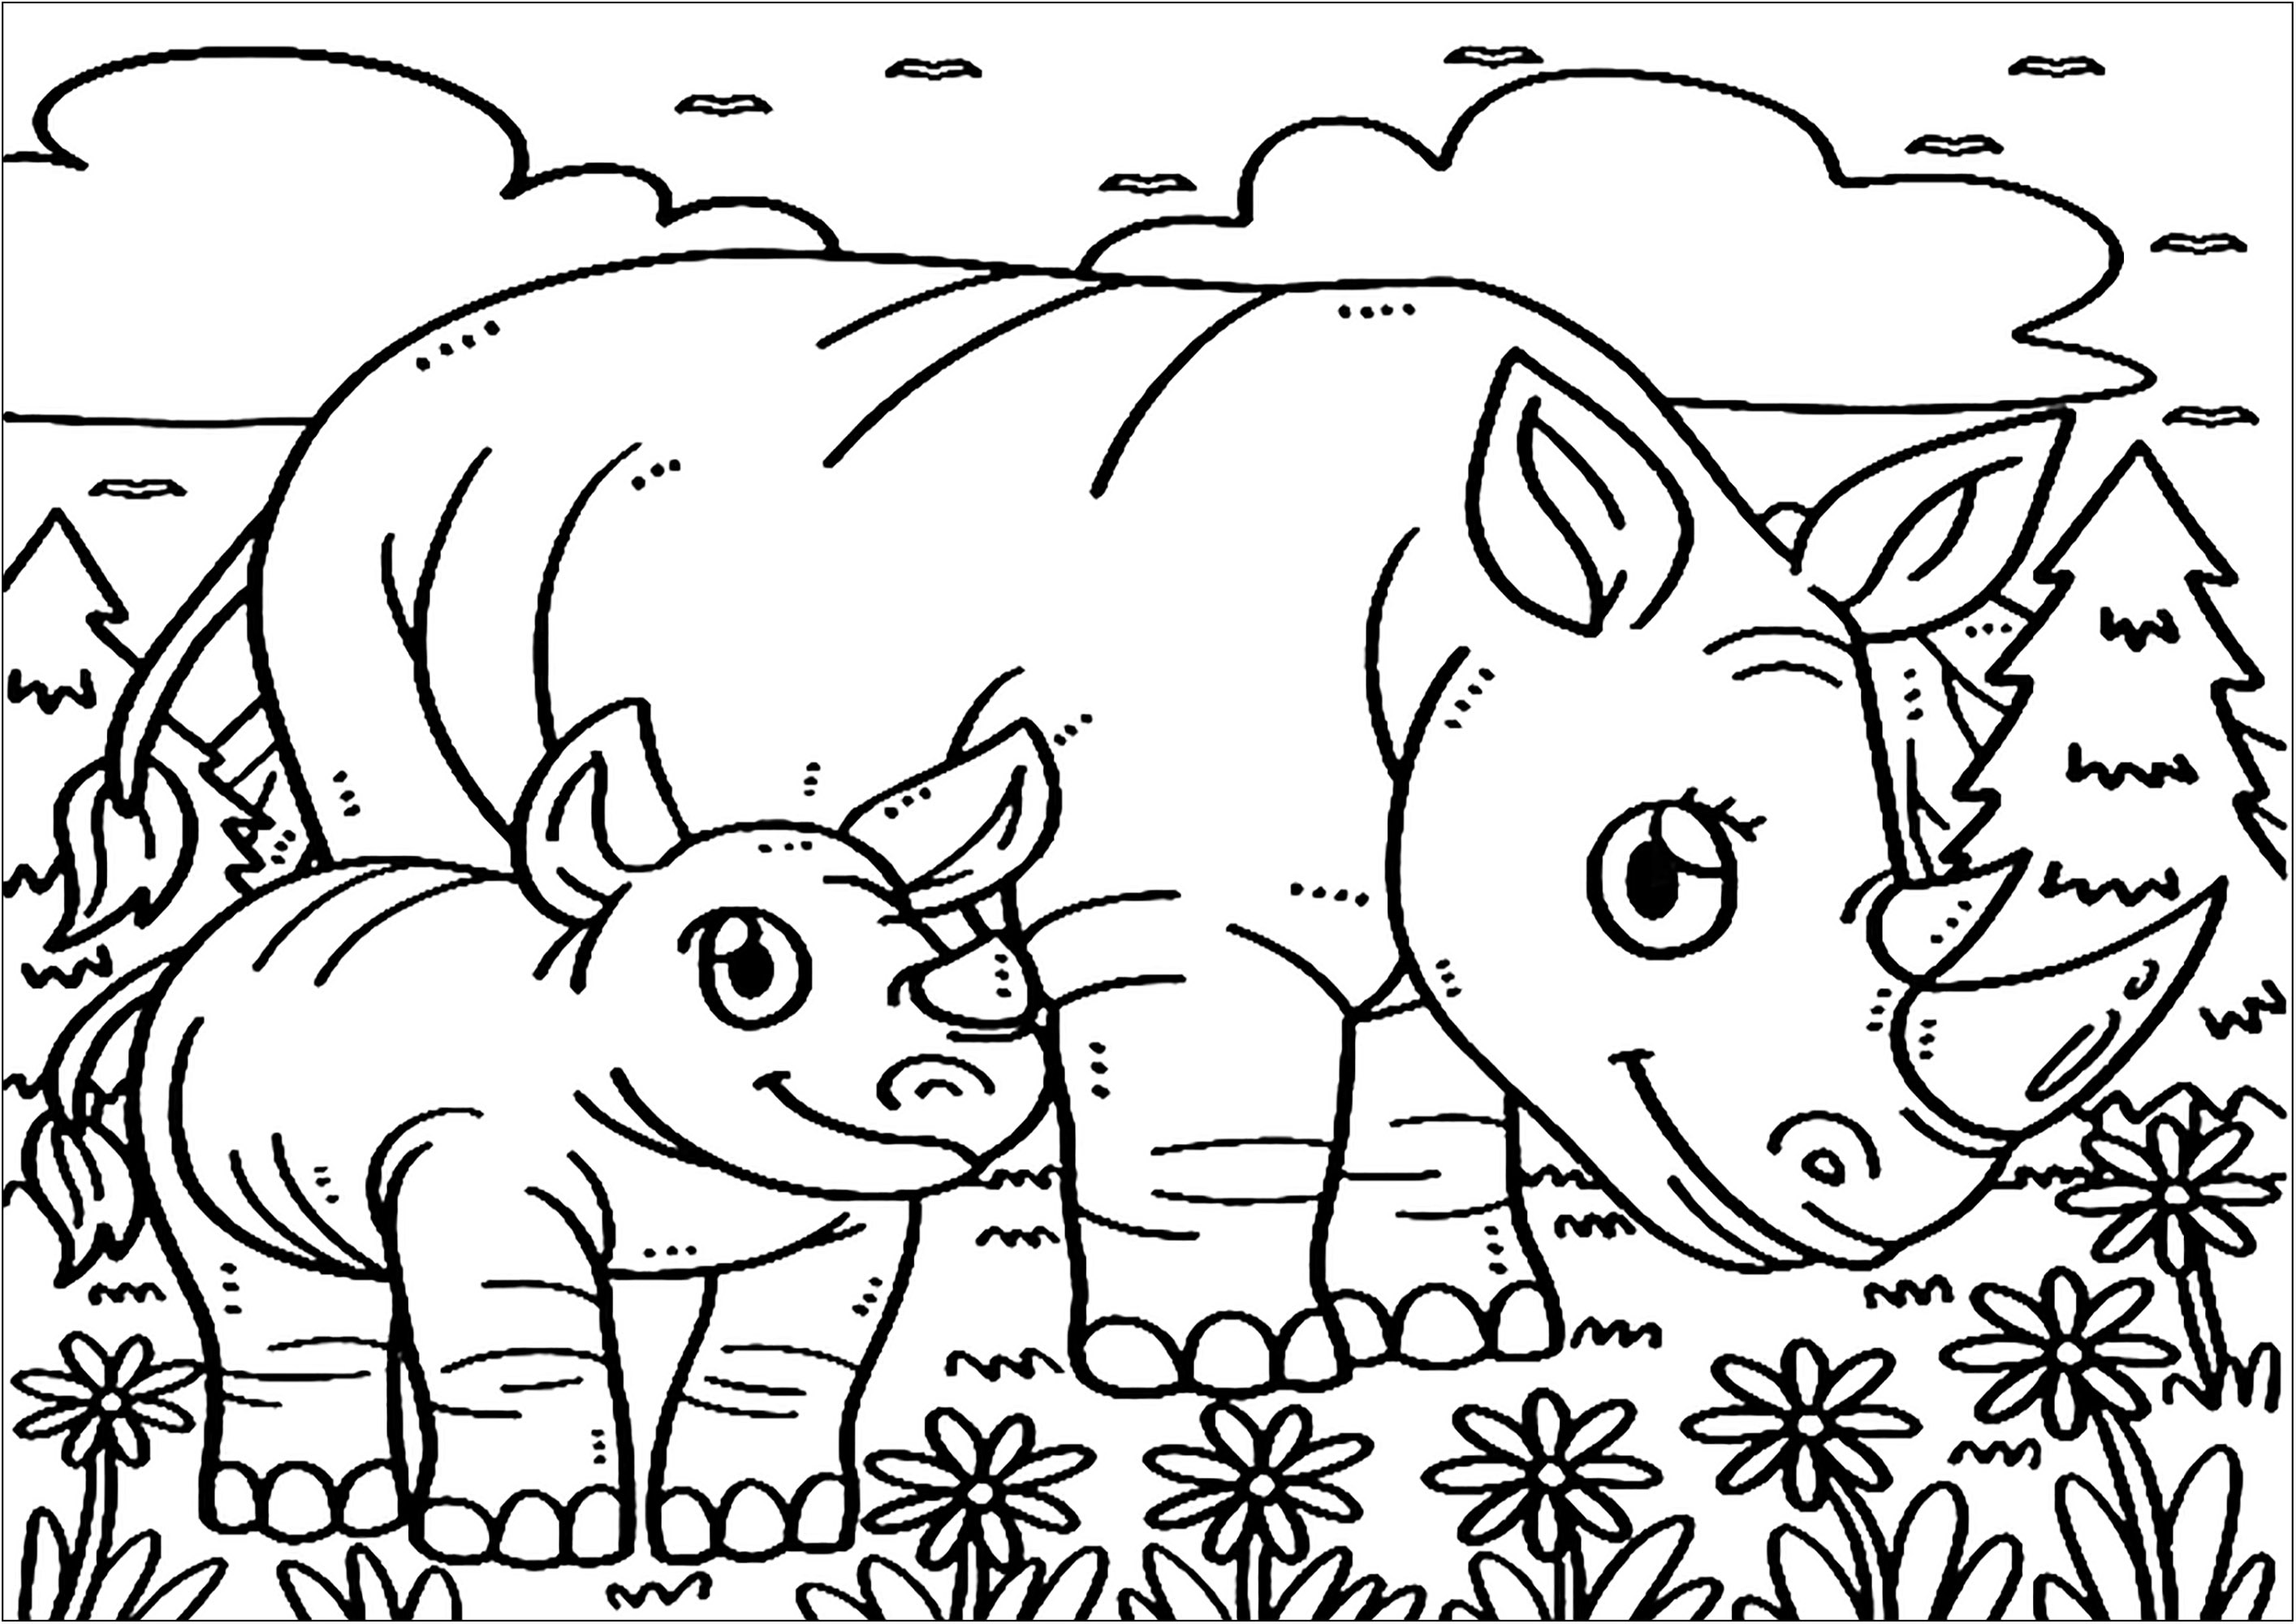 Funny free Rhinos coloring page to print and color